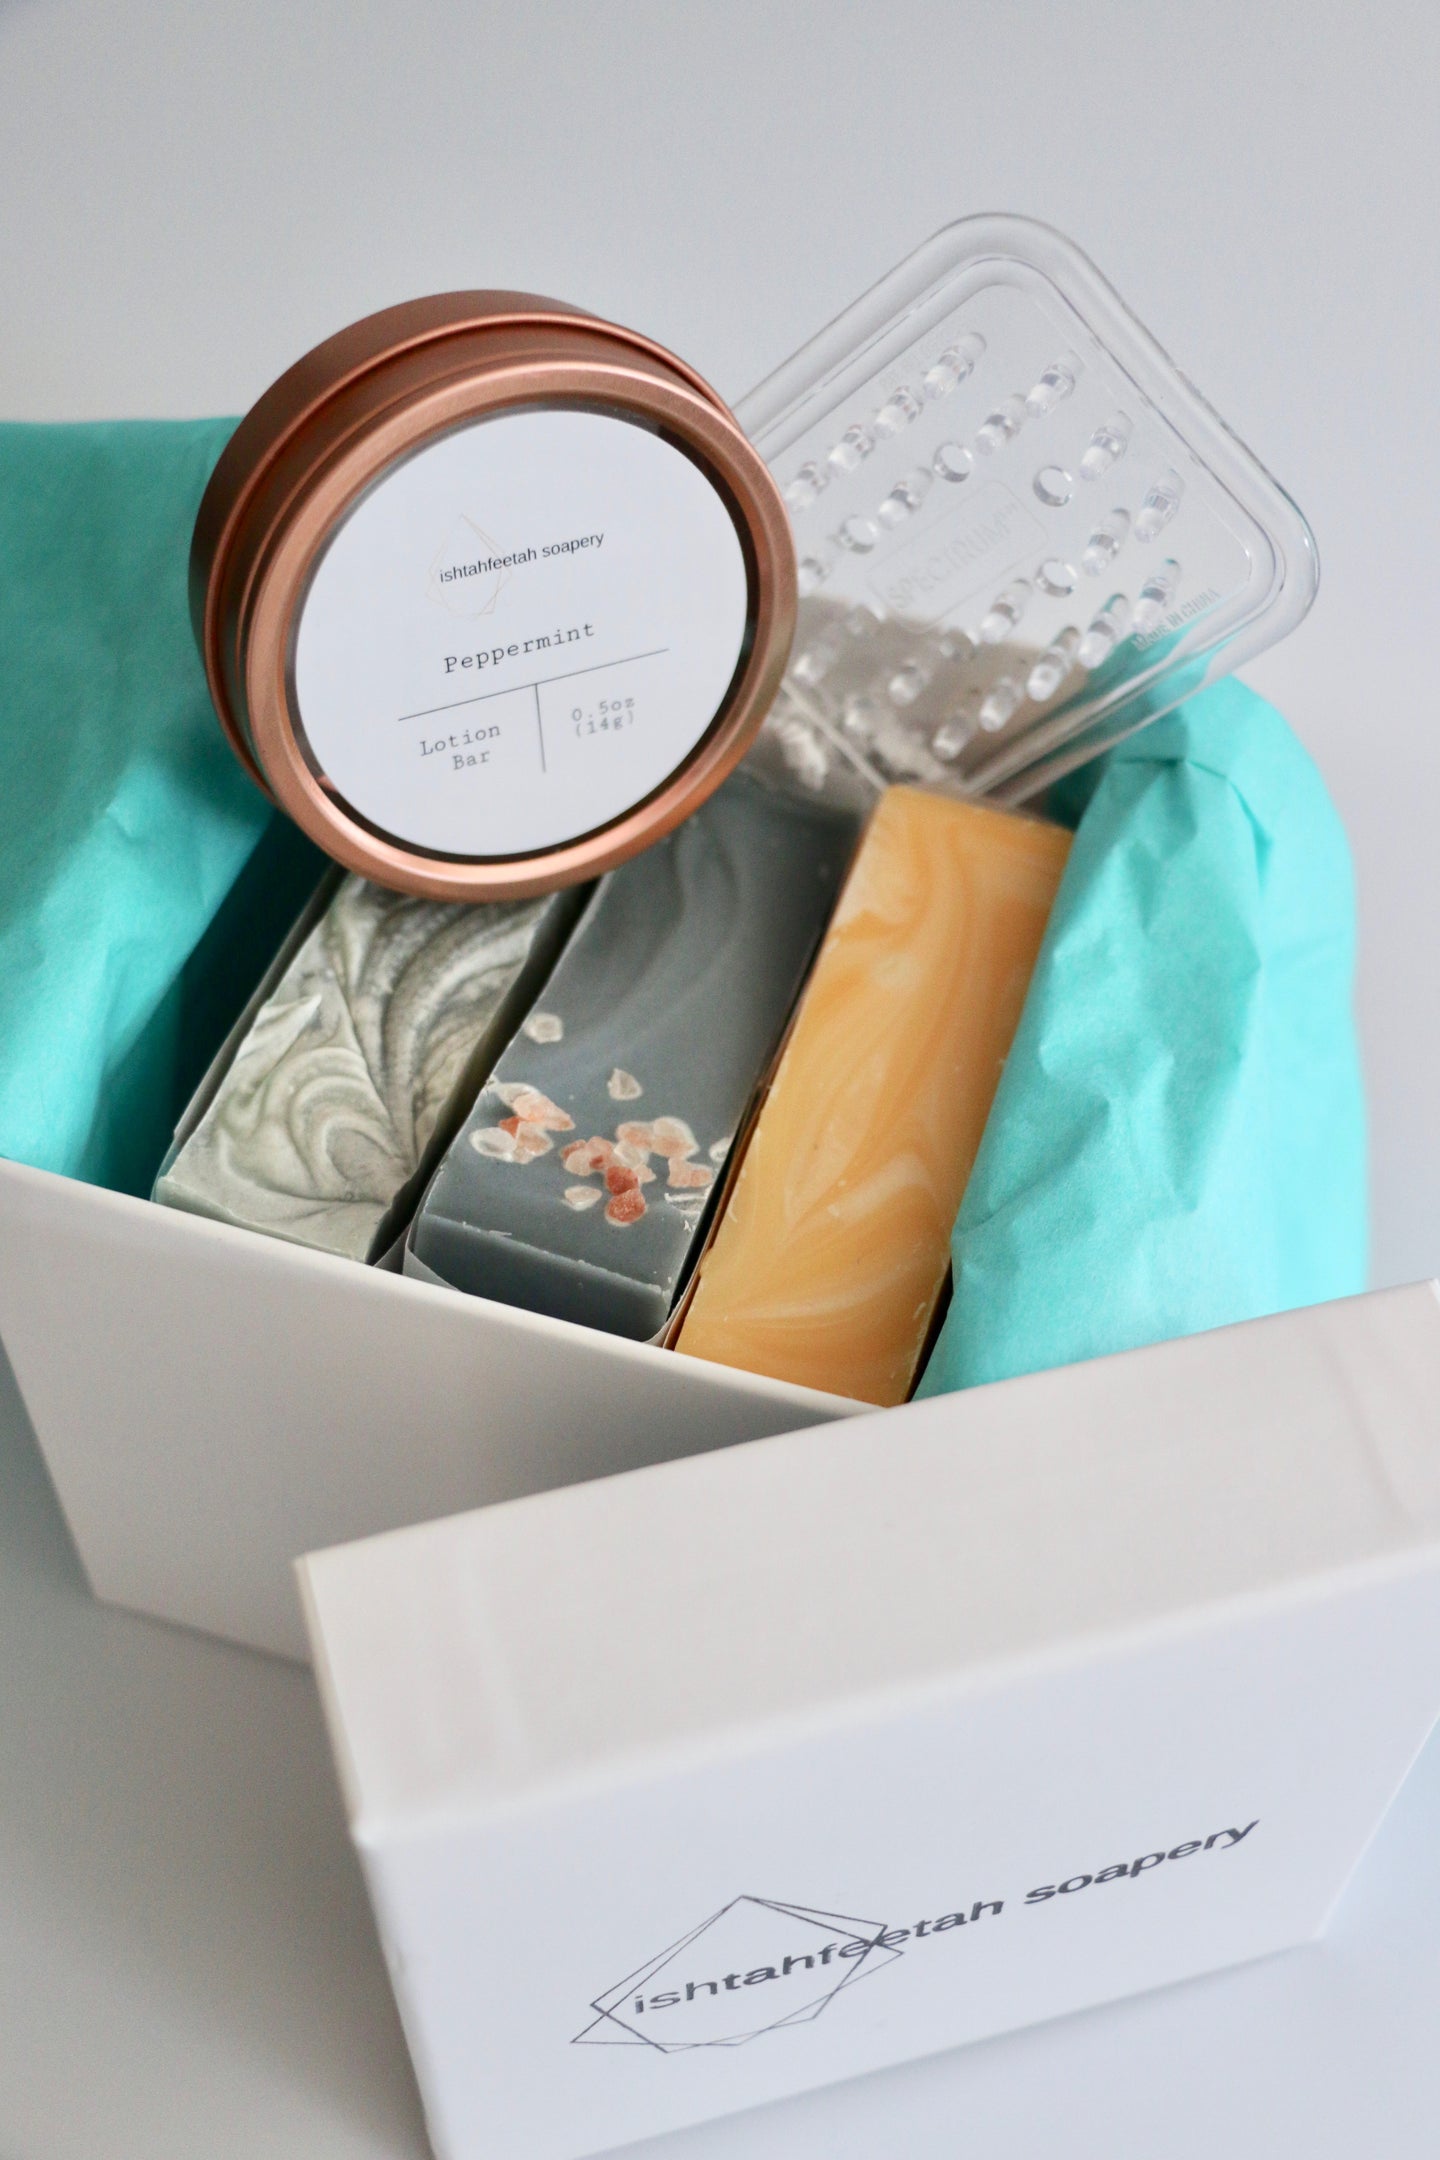 Gift box with three handcrafted soaps, a soap lift, and a mini lotion bar.